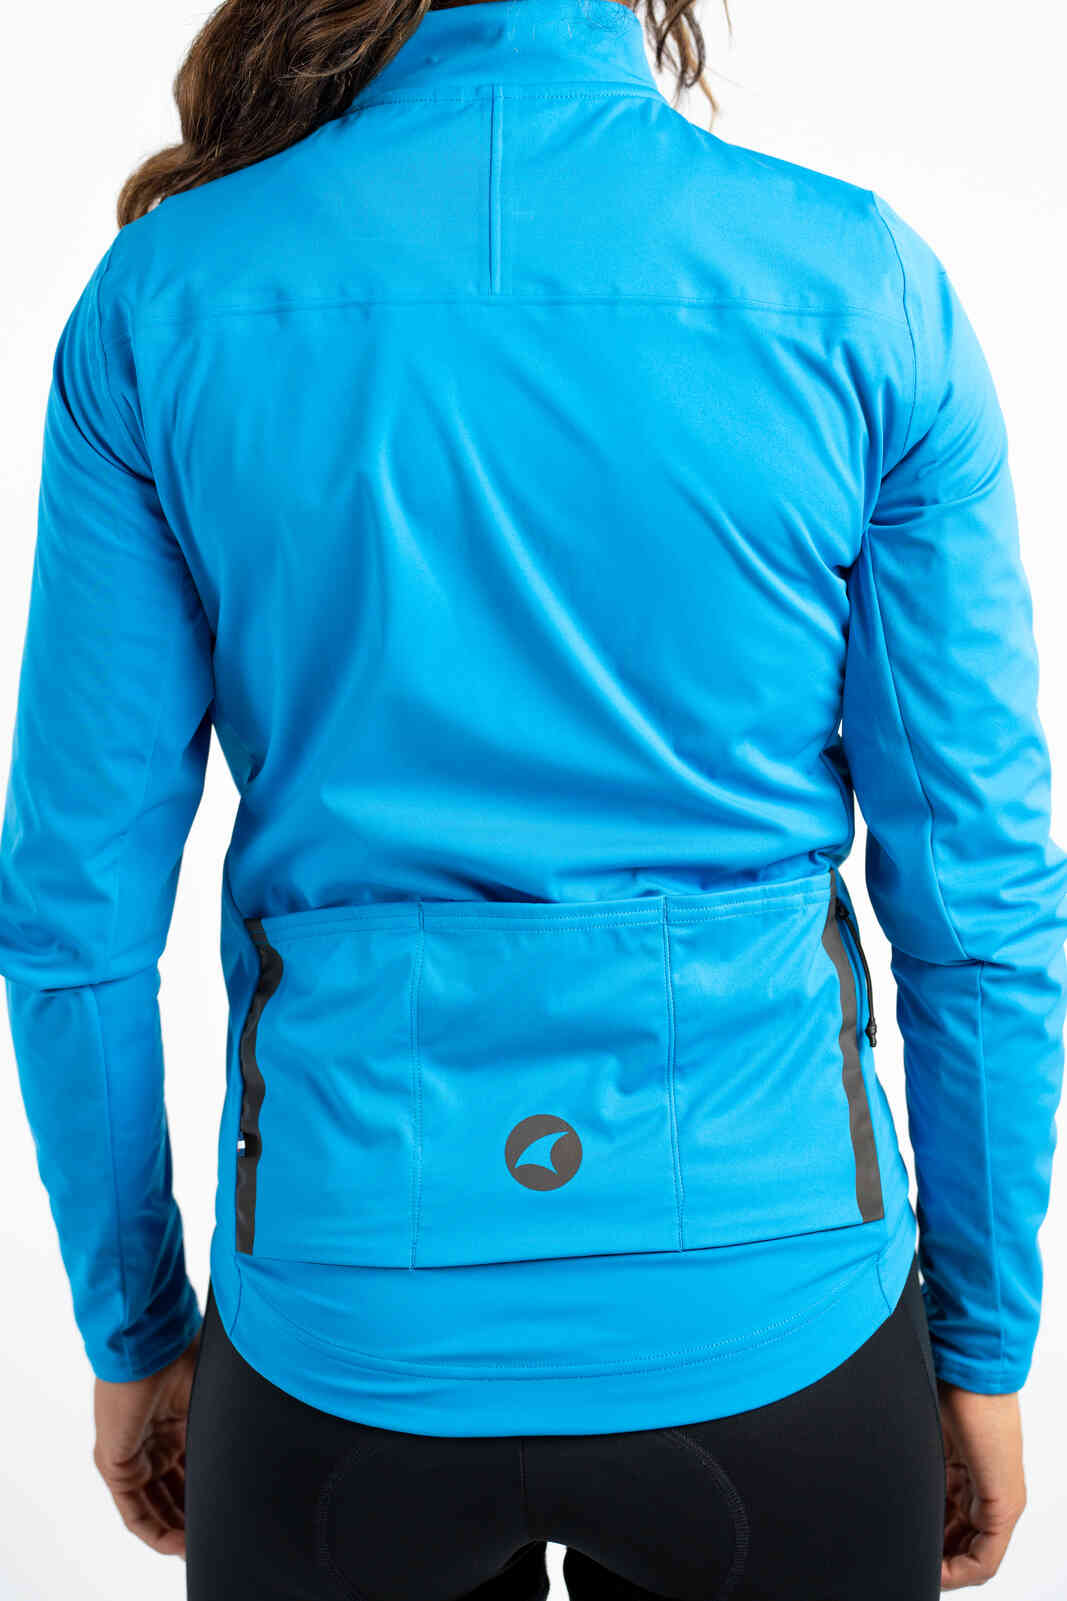 Women's Blue Water-Repelling Cycling Jacket - Storm+ Back Pockets